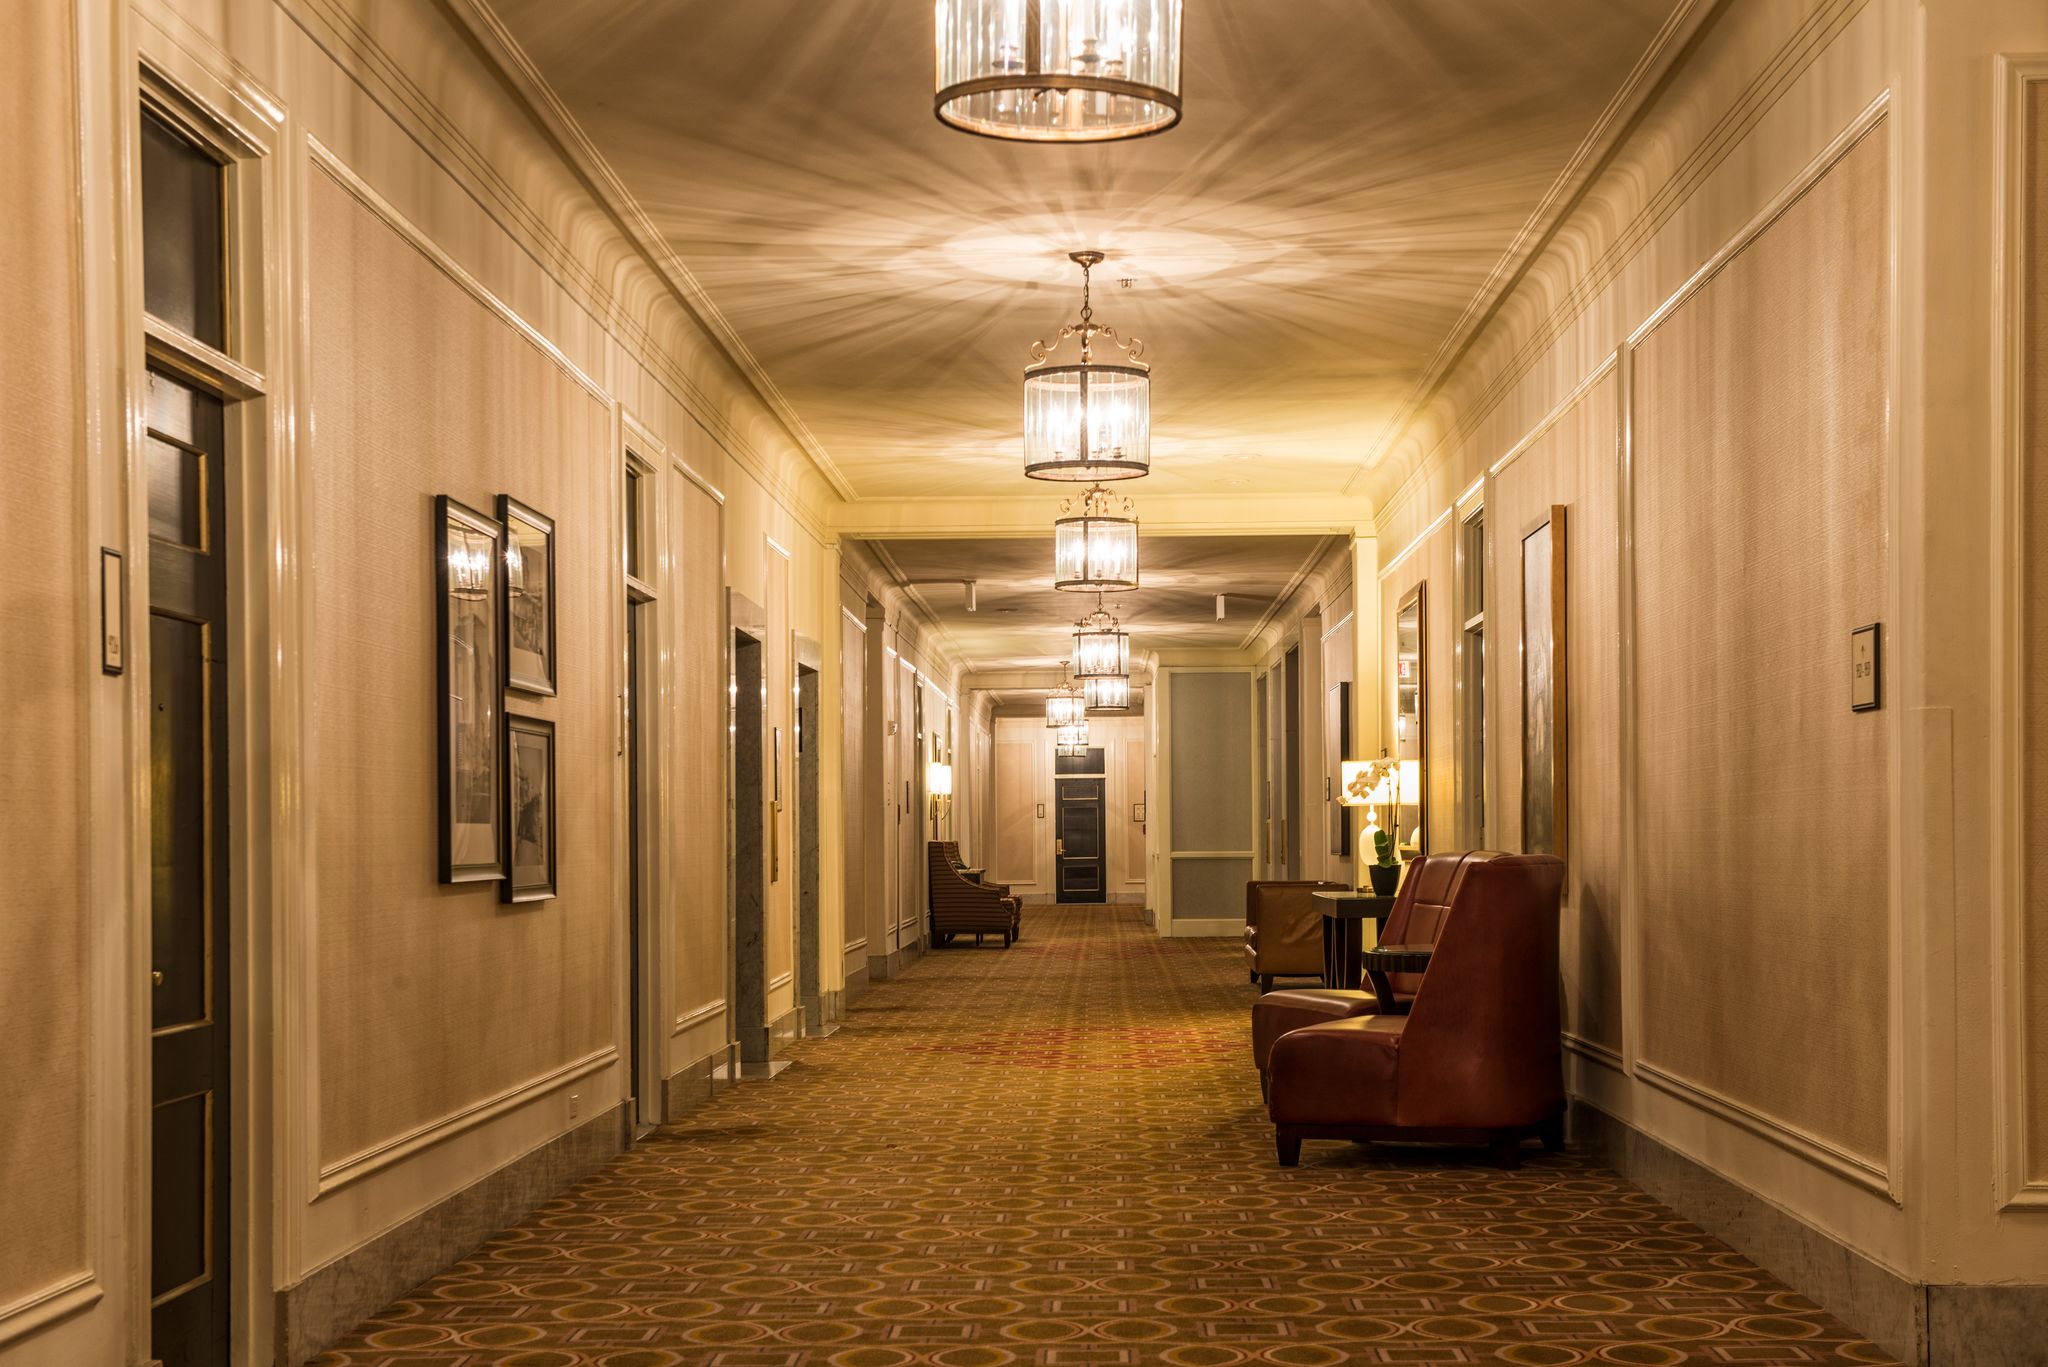 A photo of a hallway. | Source: Getty Images